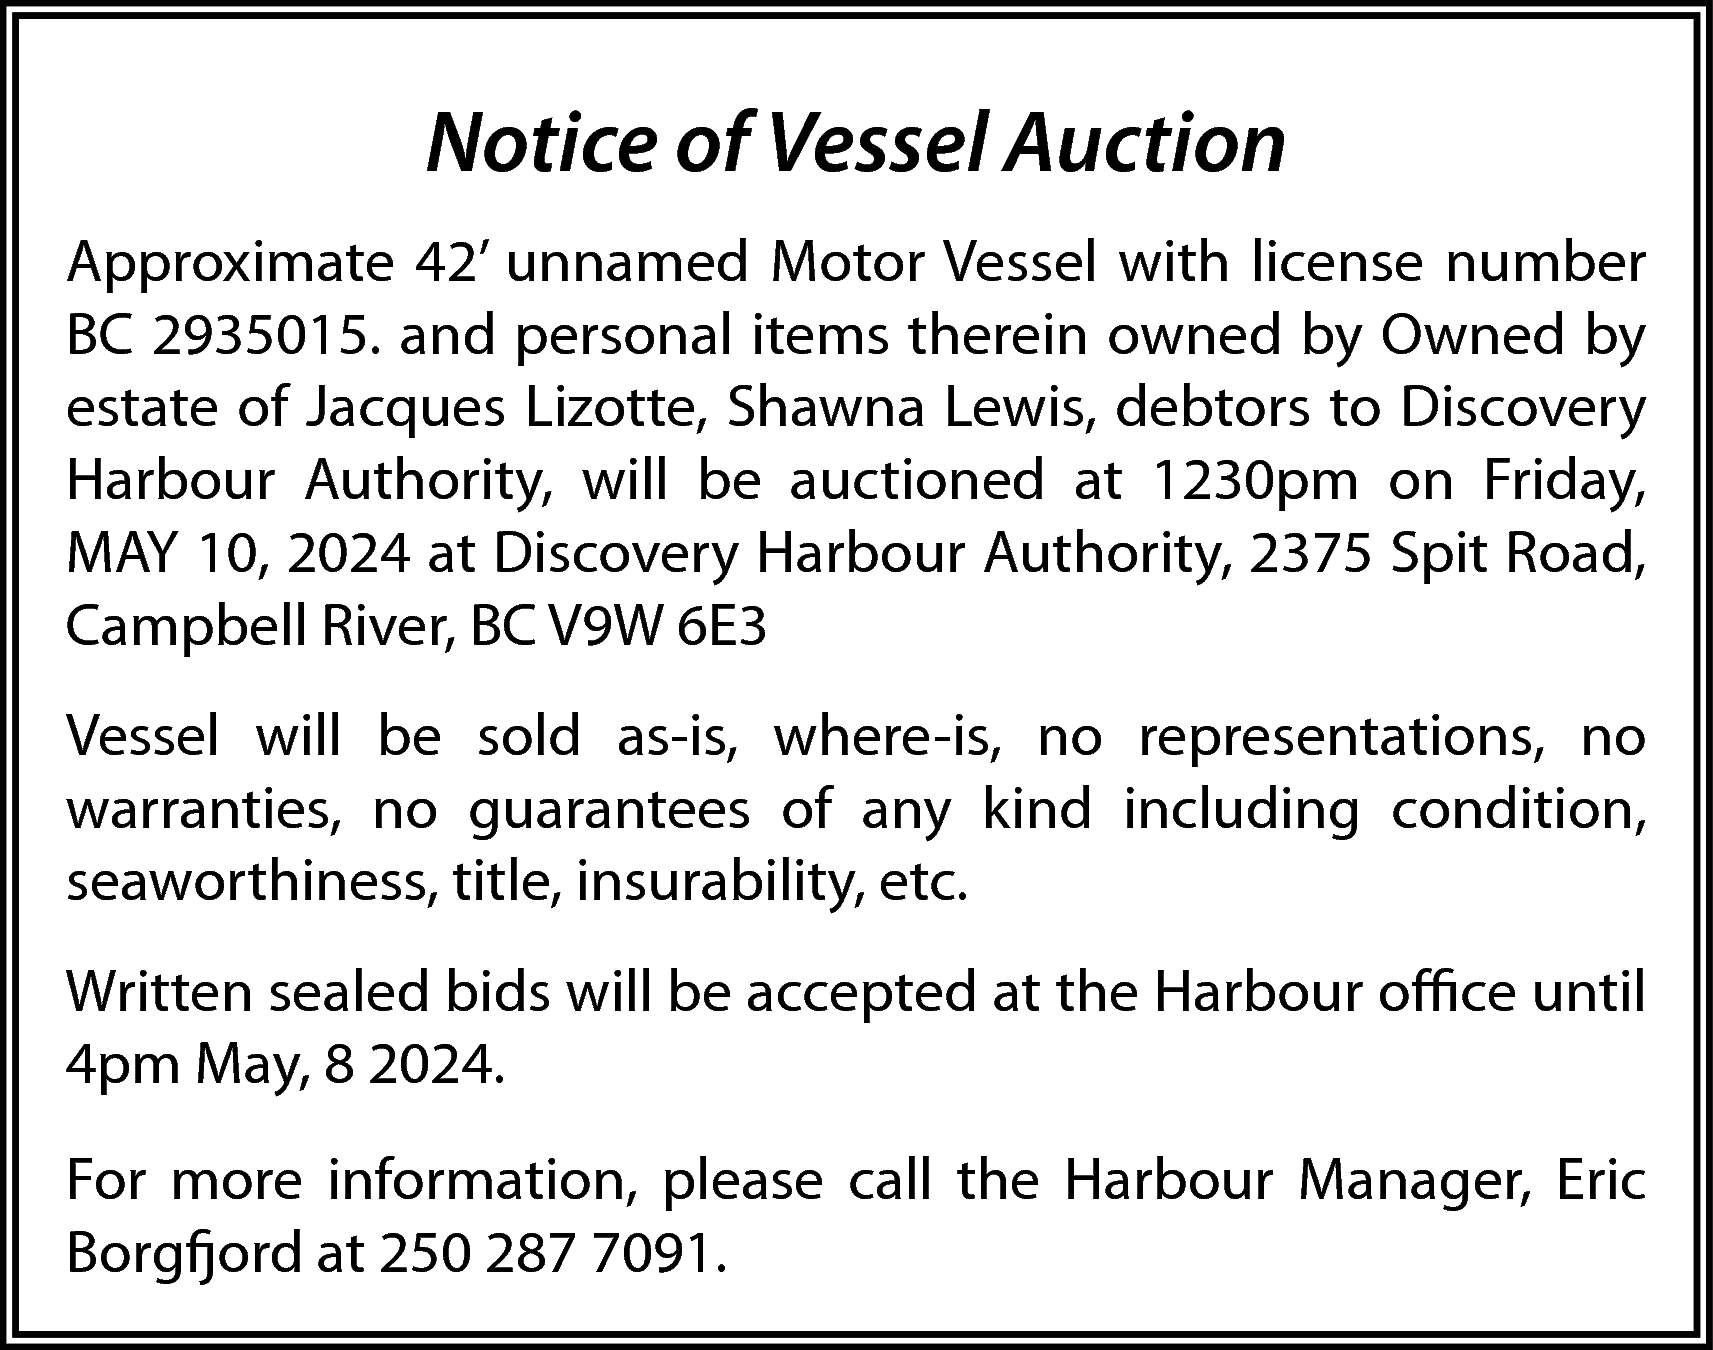 Notice of Vessel Auction <br>Approximate  Notice of Vessel Auction  Approximate 42’ unnamed Motor Vessel with license number  BC 2935015. and personal items therein owned by Owned by  estate of Jacques Lizotte, Shawna Lewis, debtors to Discovery  Harbour Authority, will be auctioned at 1230pm on Friday,  MAY 10, 2024 at Discovery Harbour Authority, 2375 Spit Road,  Campbell River, BC V9W 6E3  Vessel will be sold as-is, where-is, no representations, no  warranties, no guarantees of any kind including condition,  seaworthiness, title, insurability, etc.  Written sealed bids will be accepted at the Harbour office until  4pm May, 8 2024.  For more information, please call the Harbour Manager, Eric  Borgfjord at 250 287 7091.    